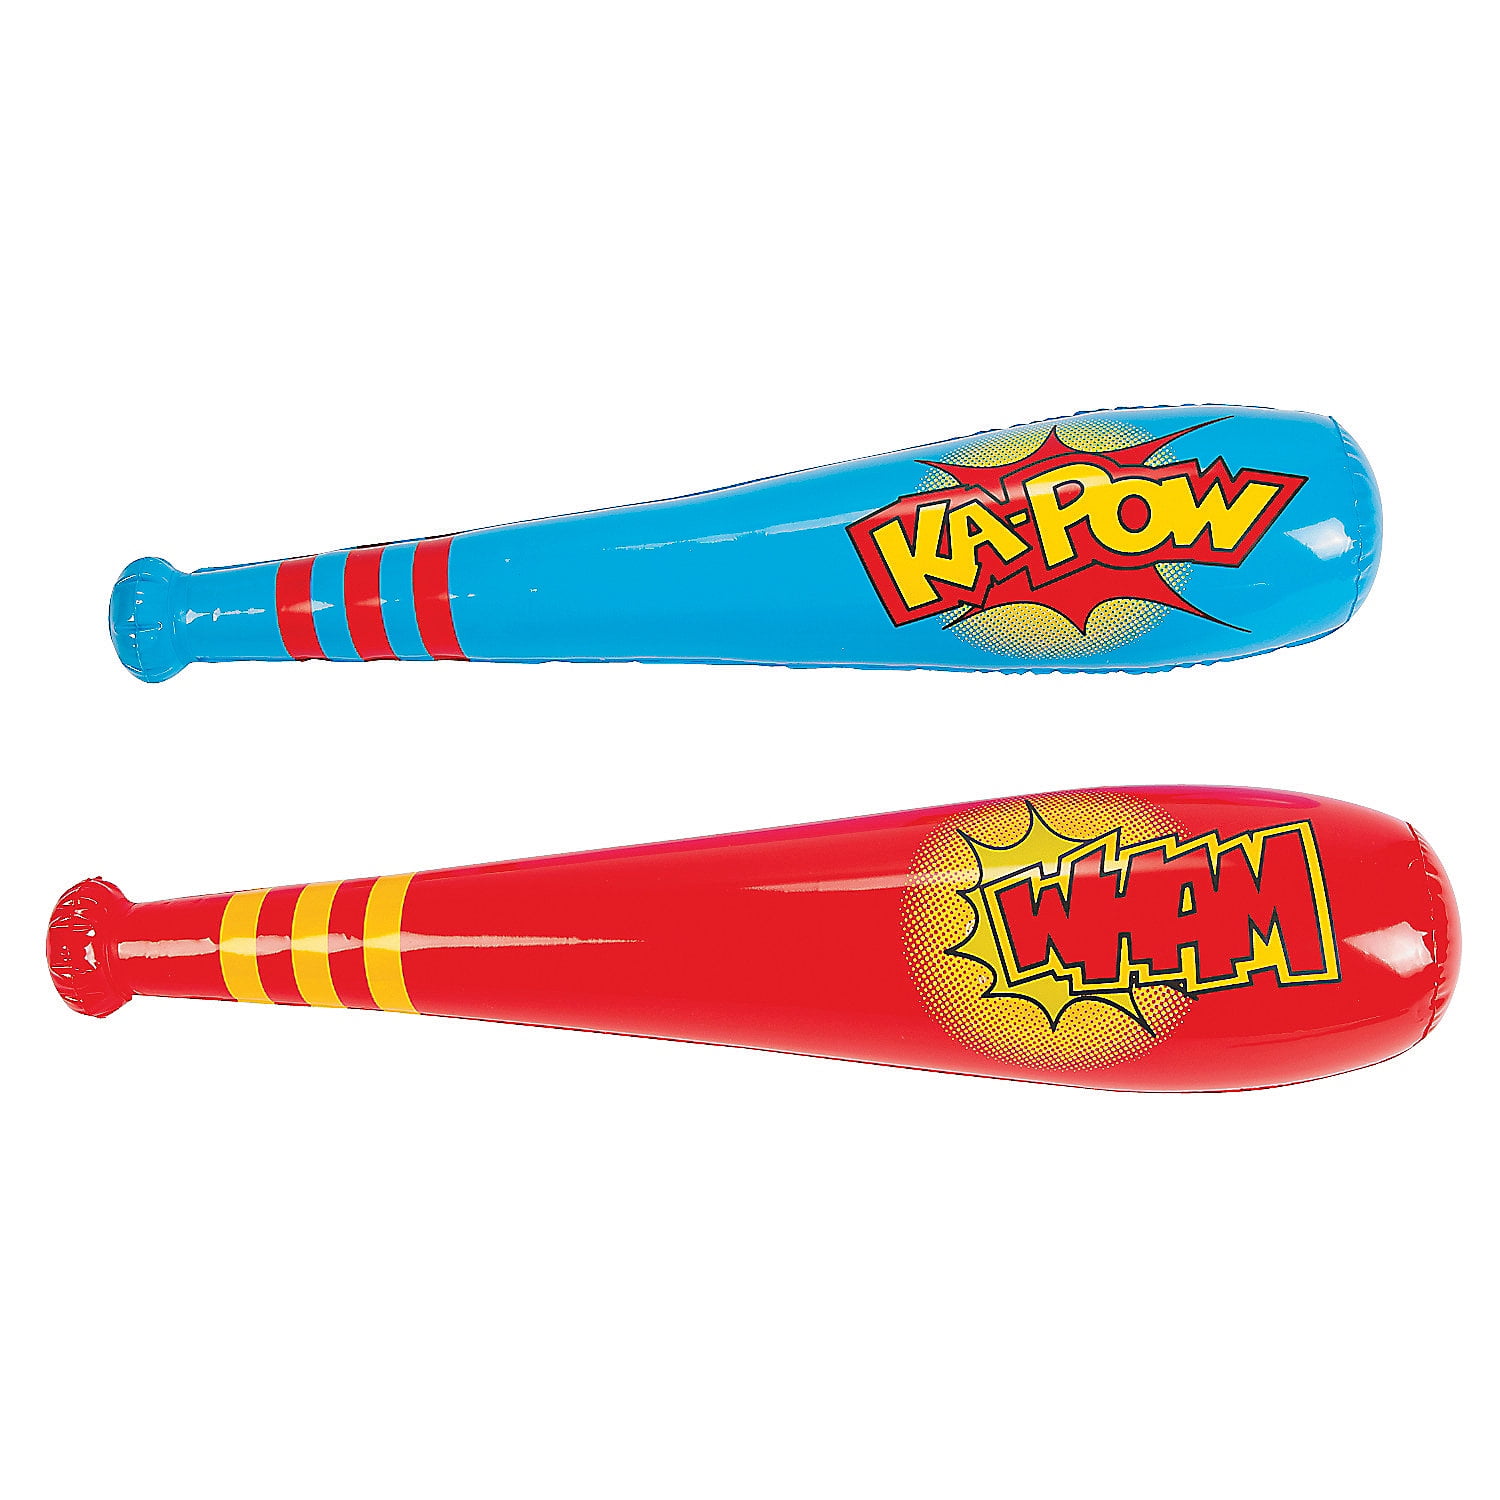 INFLATABLE POW BASEBALL BAT 48CM 1 PC NOVELTY TOY KIDS GAMES COSTUME PARTY FANCY 